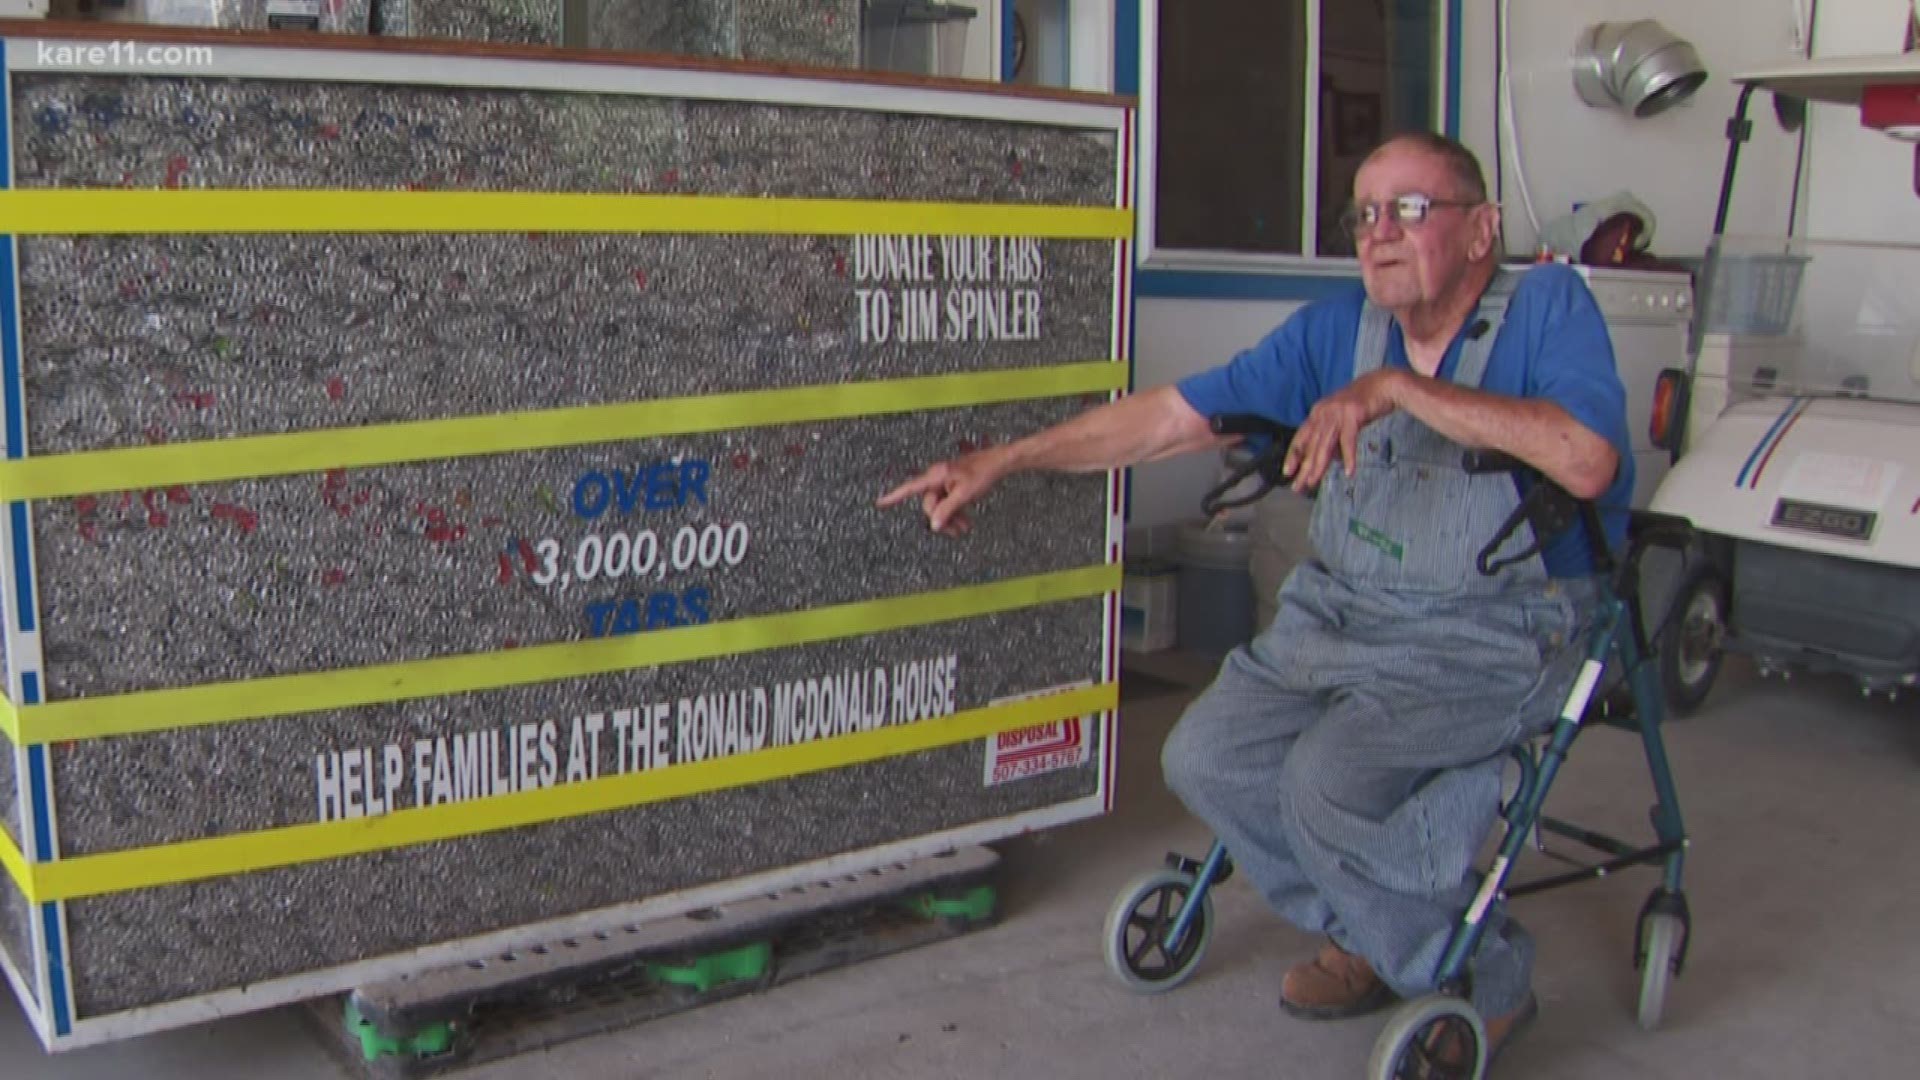 Jim Spinler has spent 30 years amassing, literally, a ton of pop tabs - more than 3 million in all. Ronald McDonald House is about to get a big delivery. https://kare11.tv/2voCvqQ